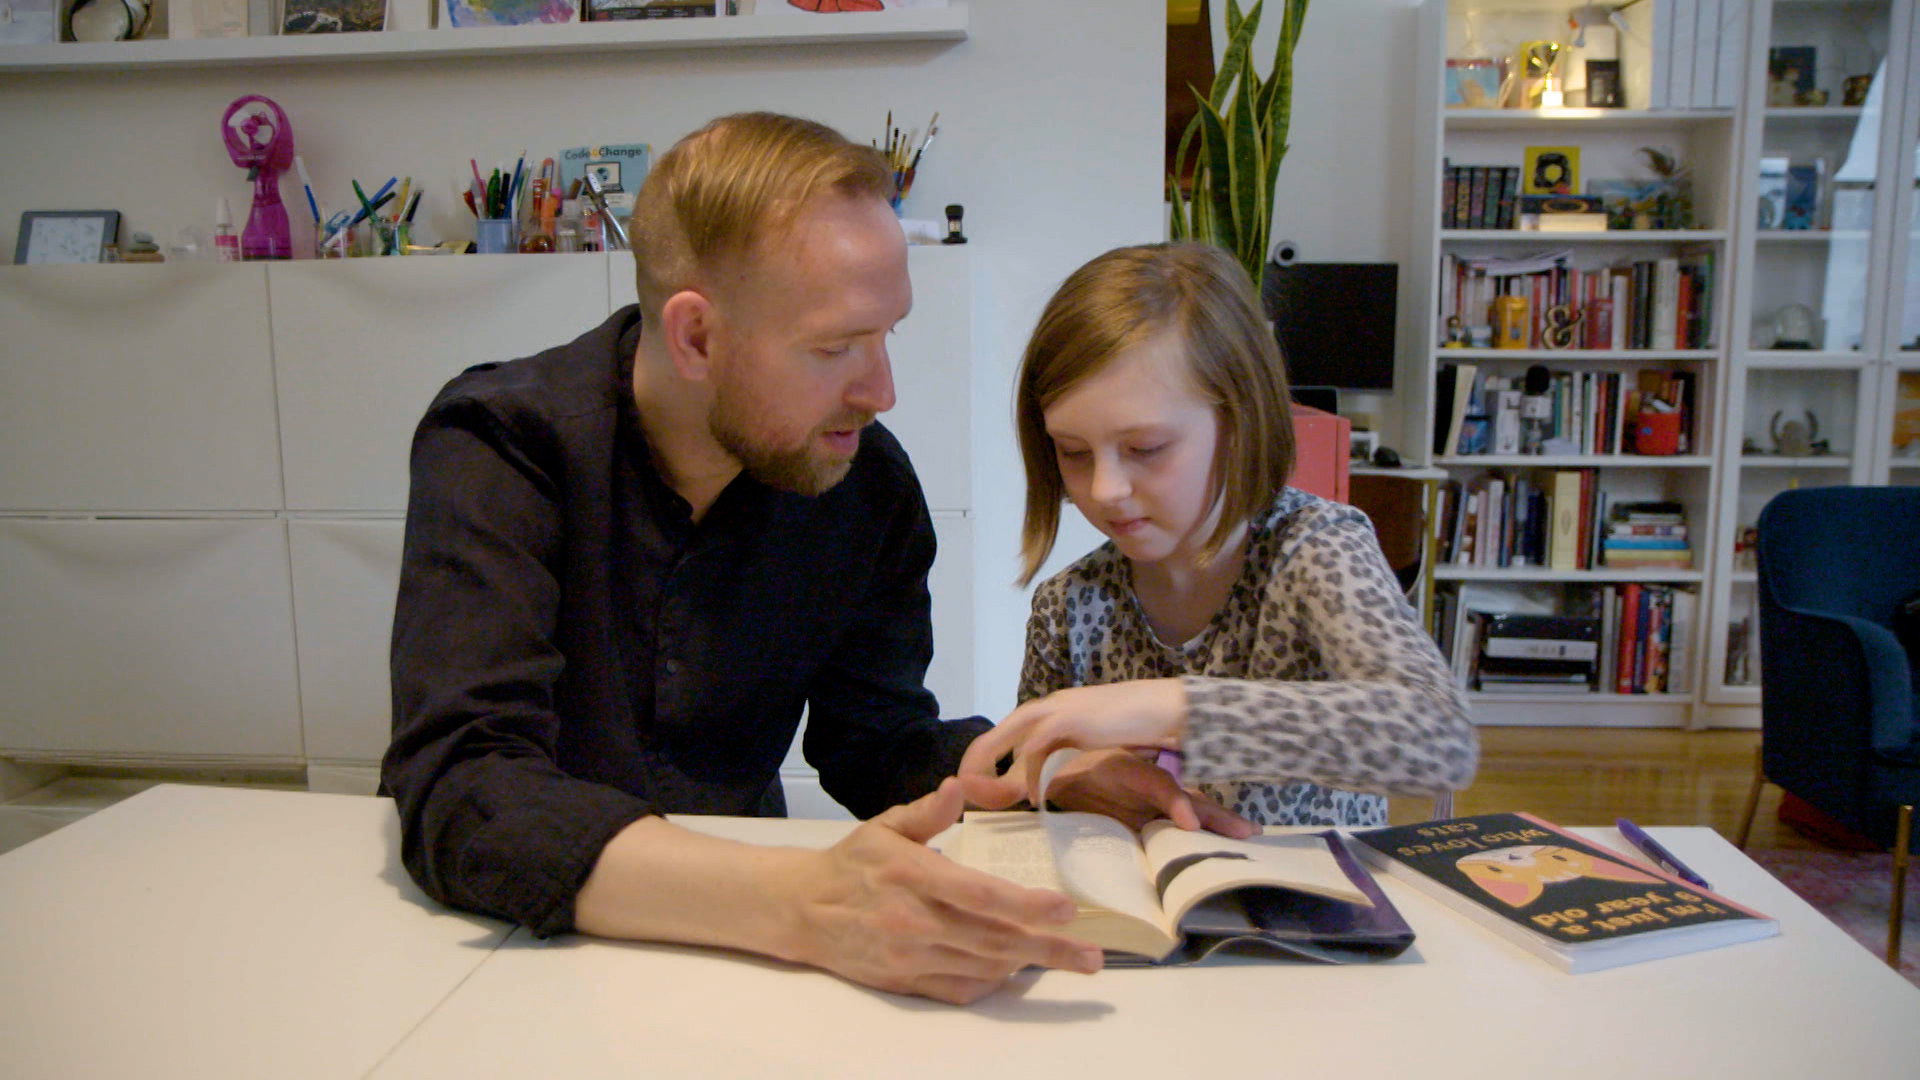 A man and teaches a young girl how to read while at home.